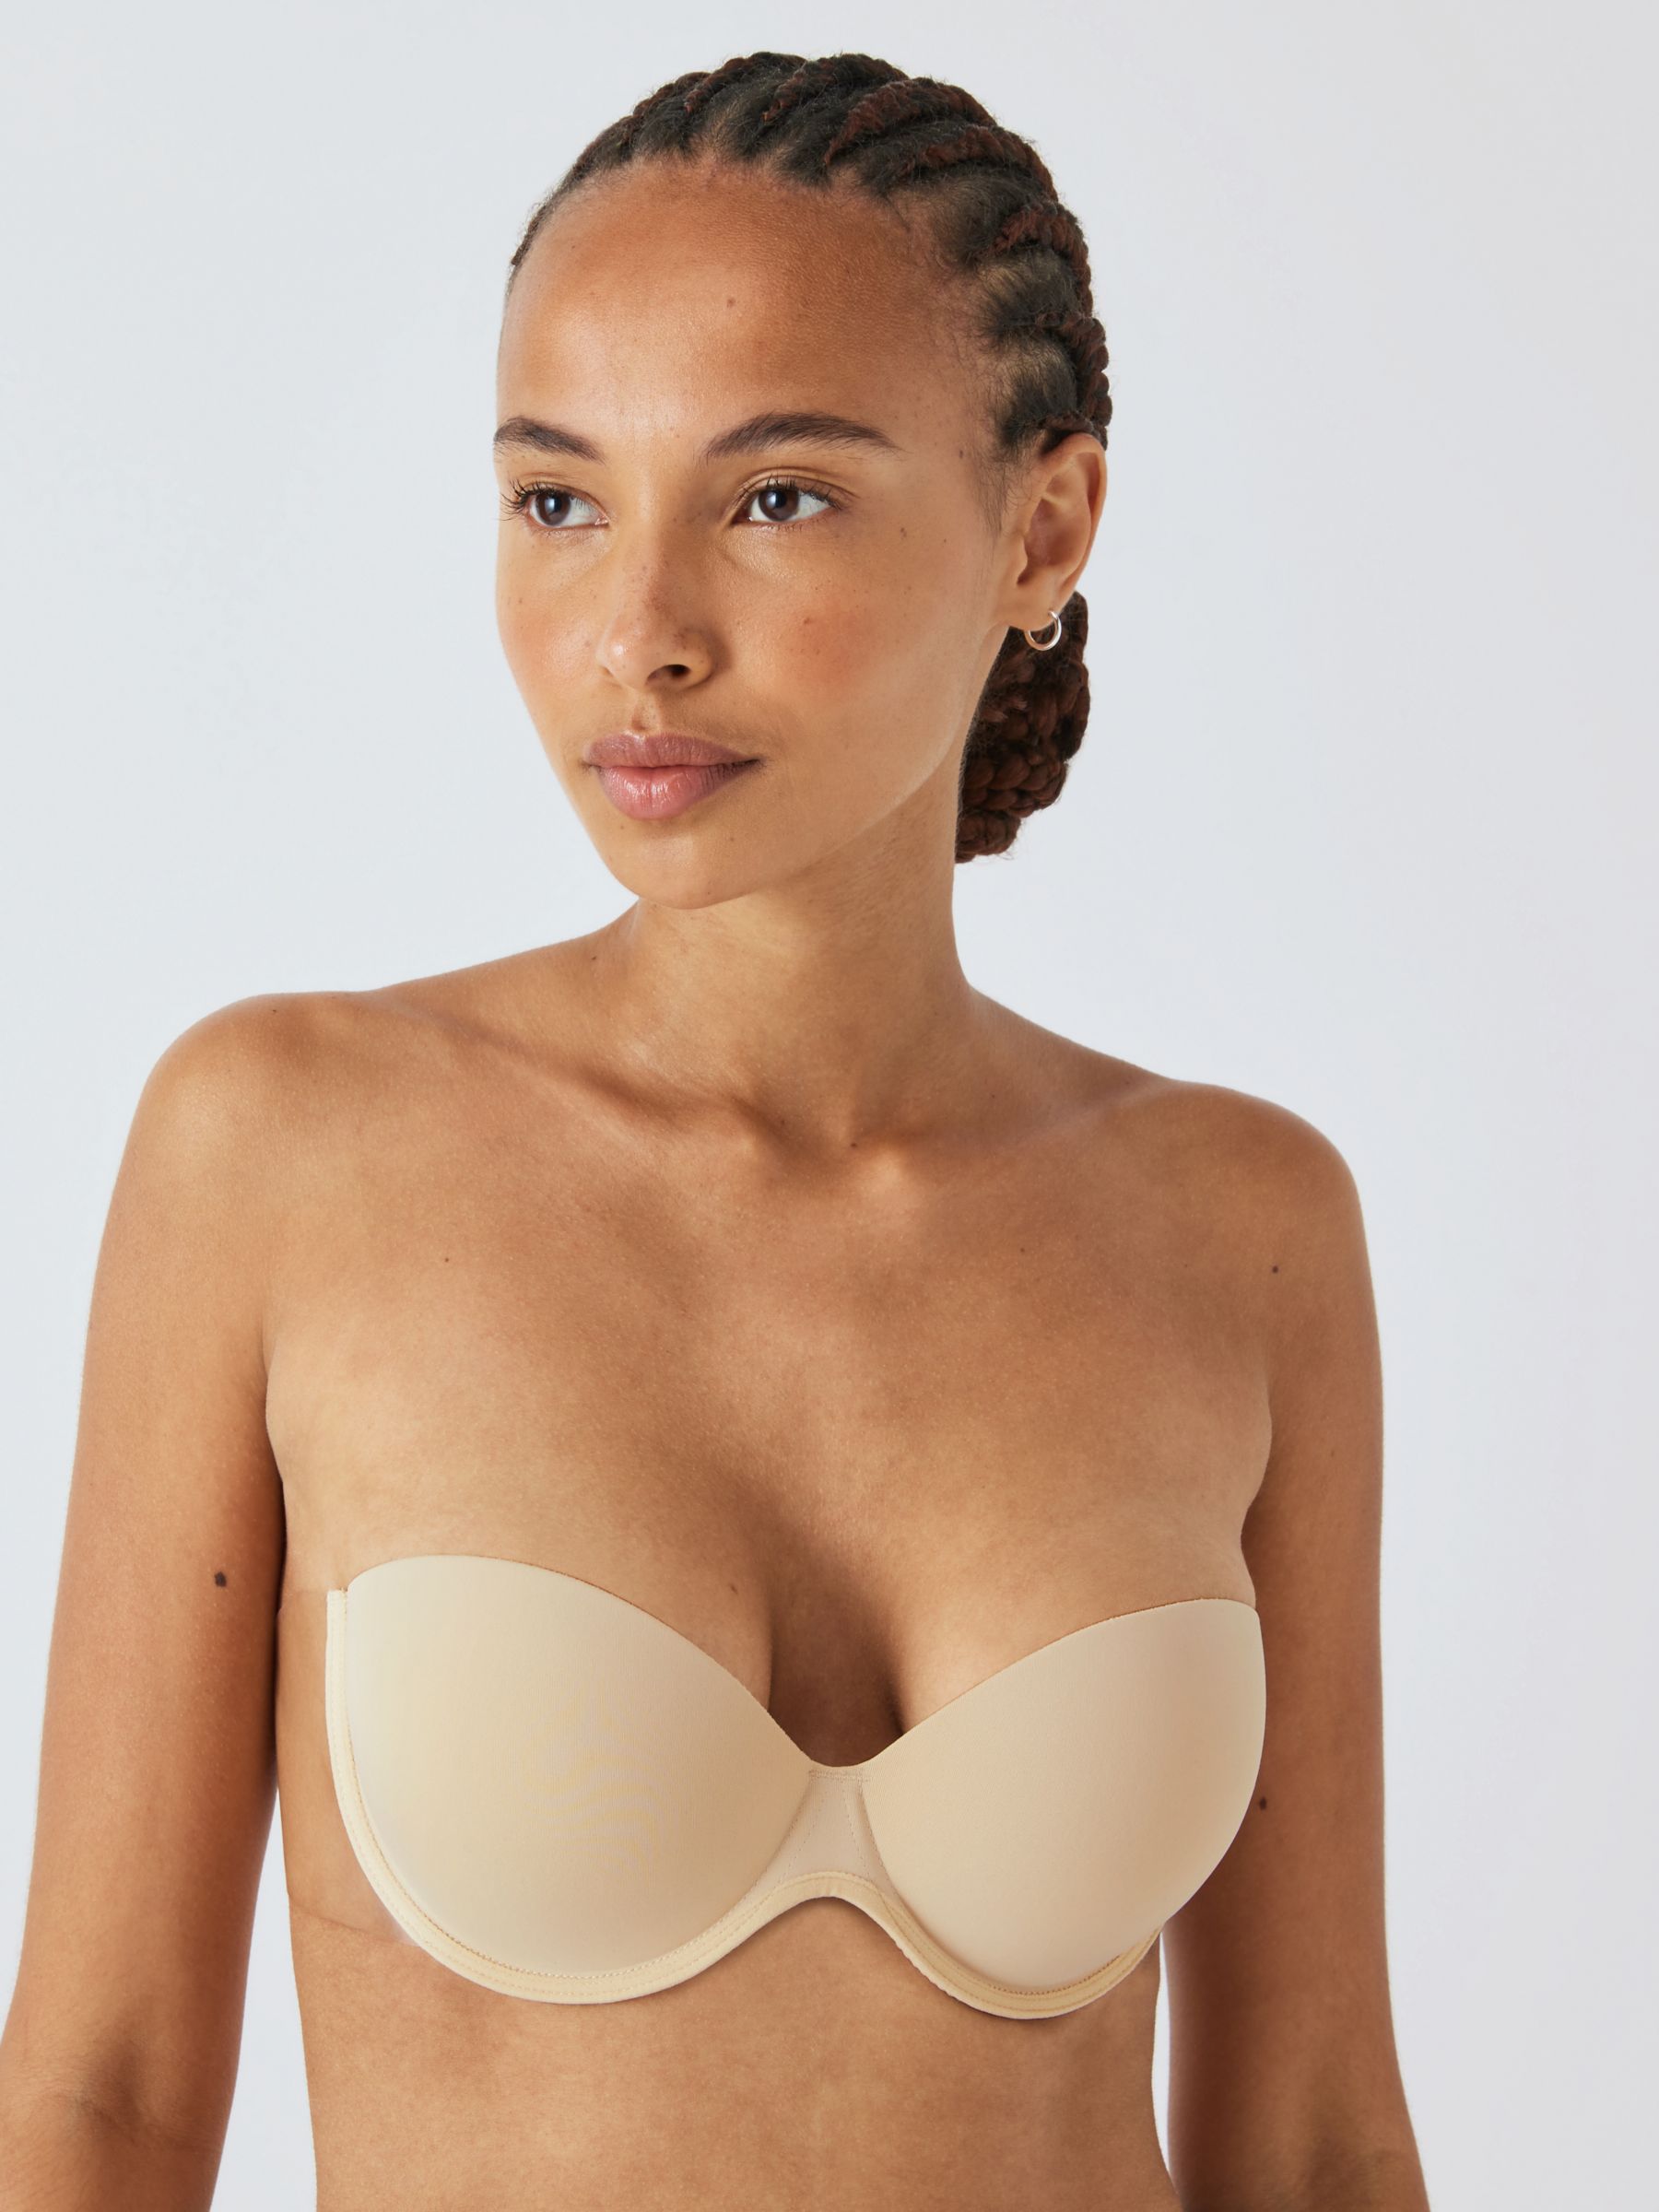 Free Size Auto Fitting Padded Air Bra 100% Same Product Shown as in the  Picture